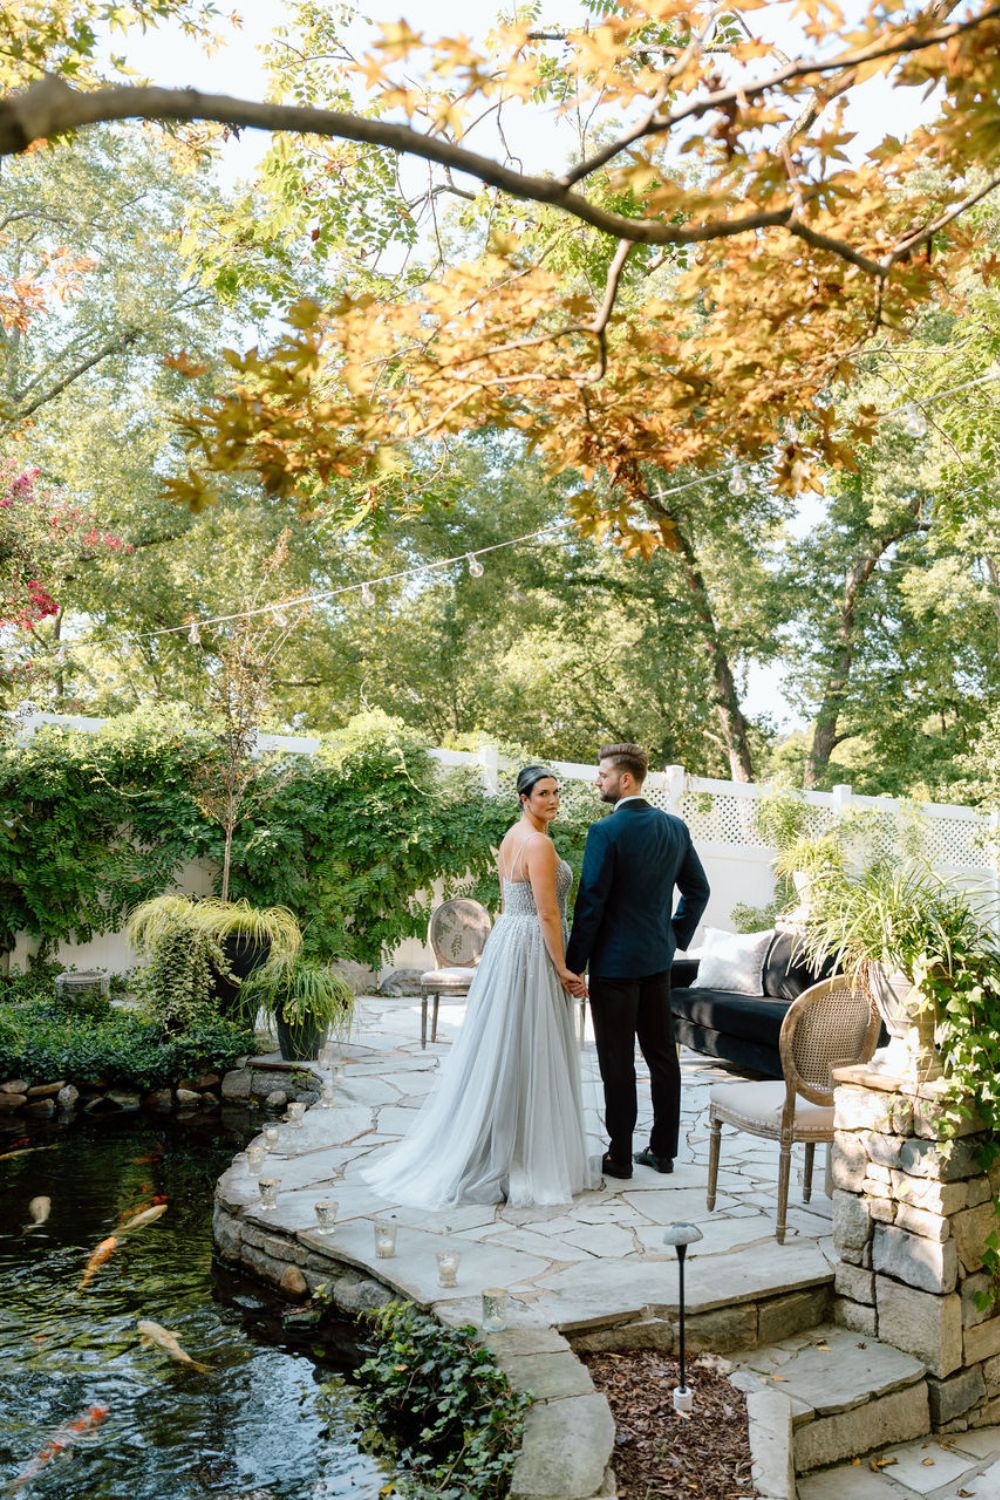 bride and groom get married in garden | CJ's Off the Square wedding venue Franklin, TN